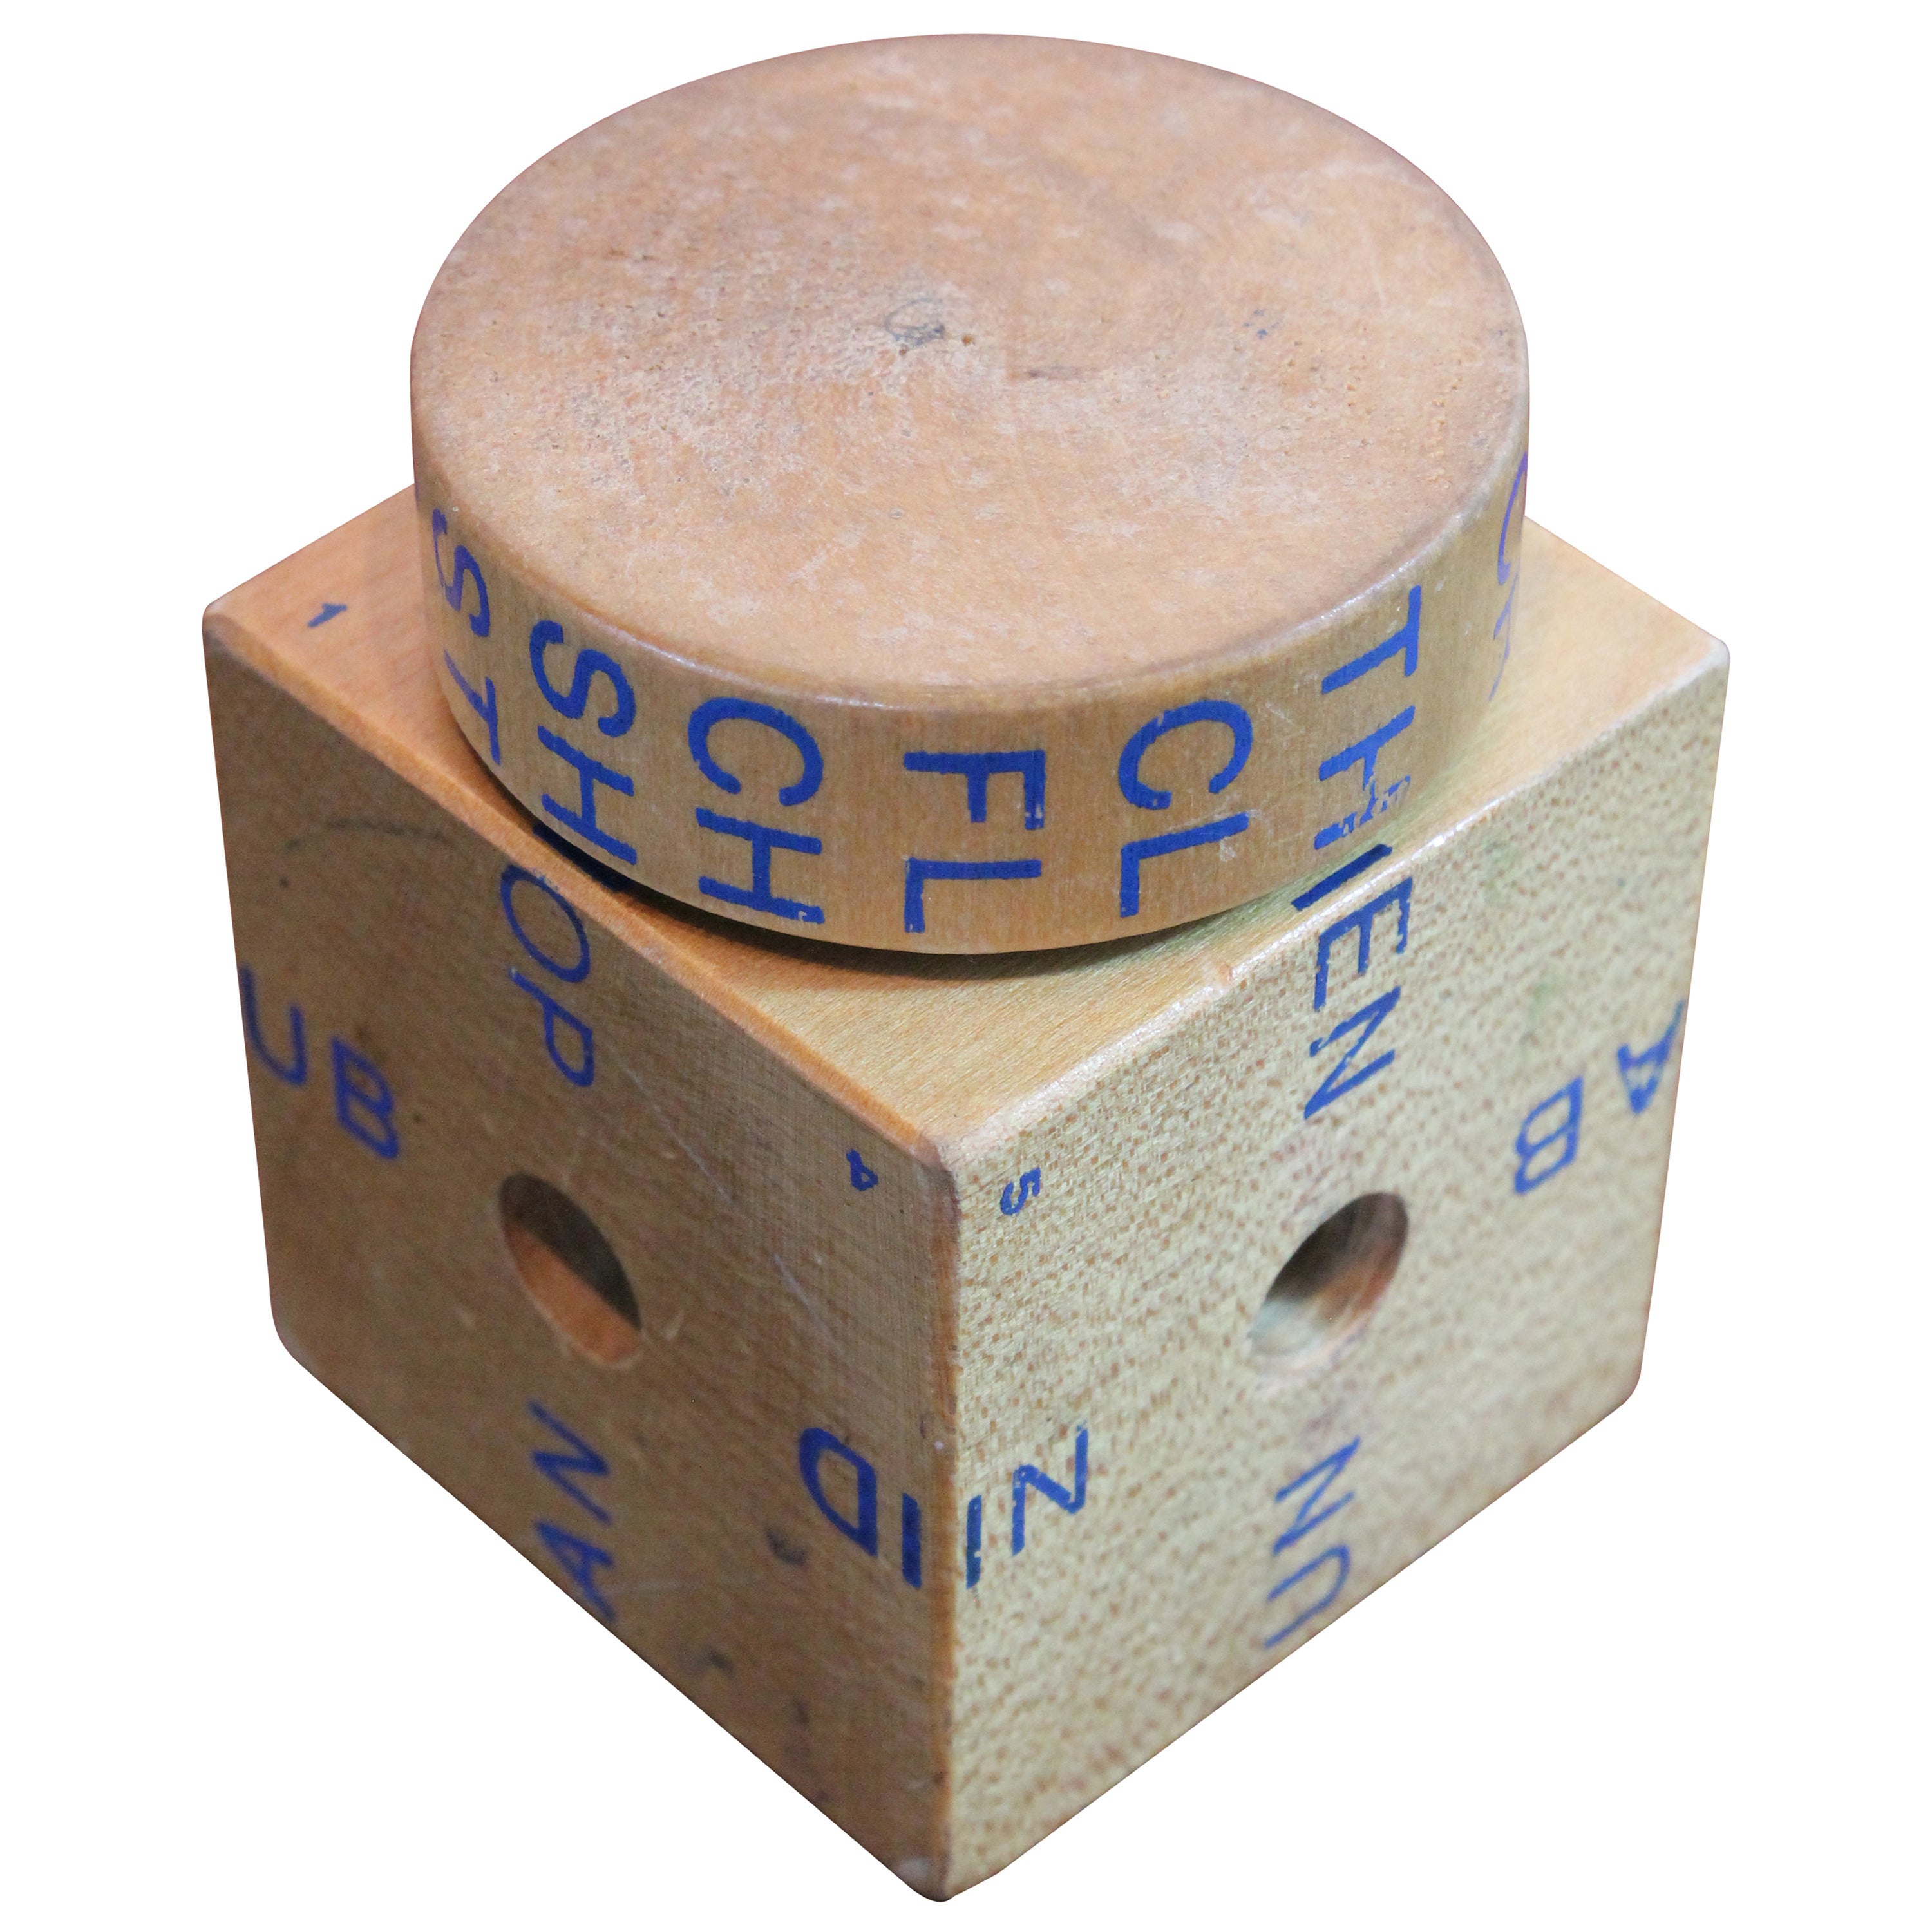 Child's Toy Spelling Cube For Sale